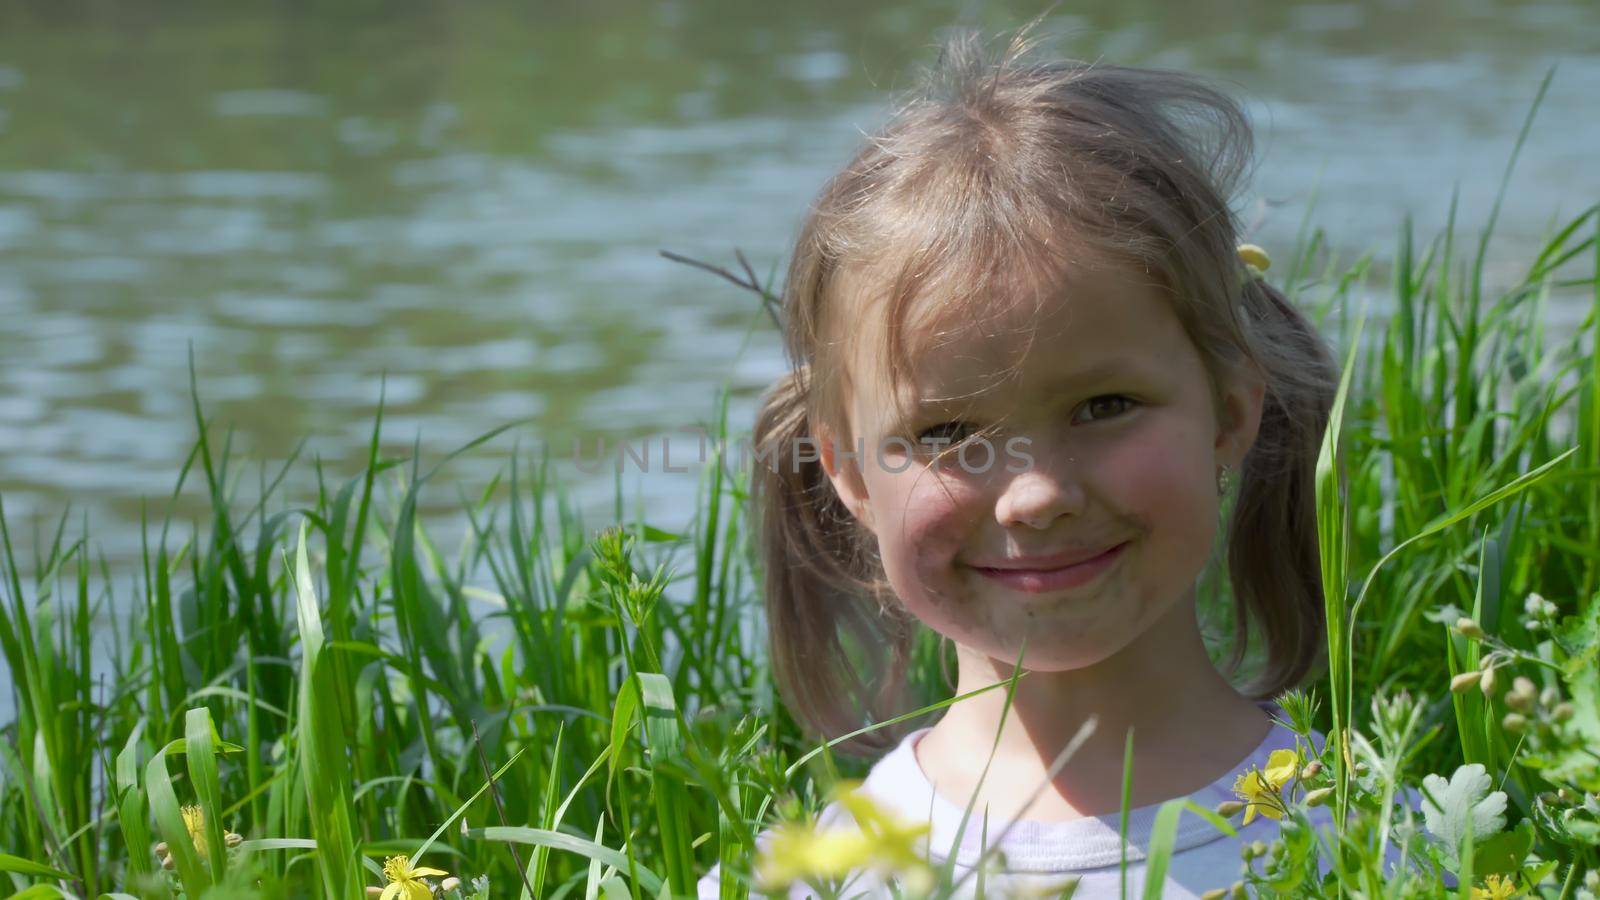 Portrait of a smiling little girl. Baby girl sitting in tall grass. Tiny kid have fun, enjoy nature outdoors.